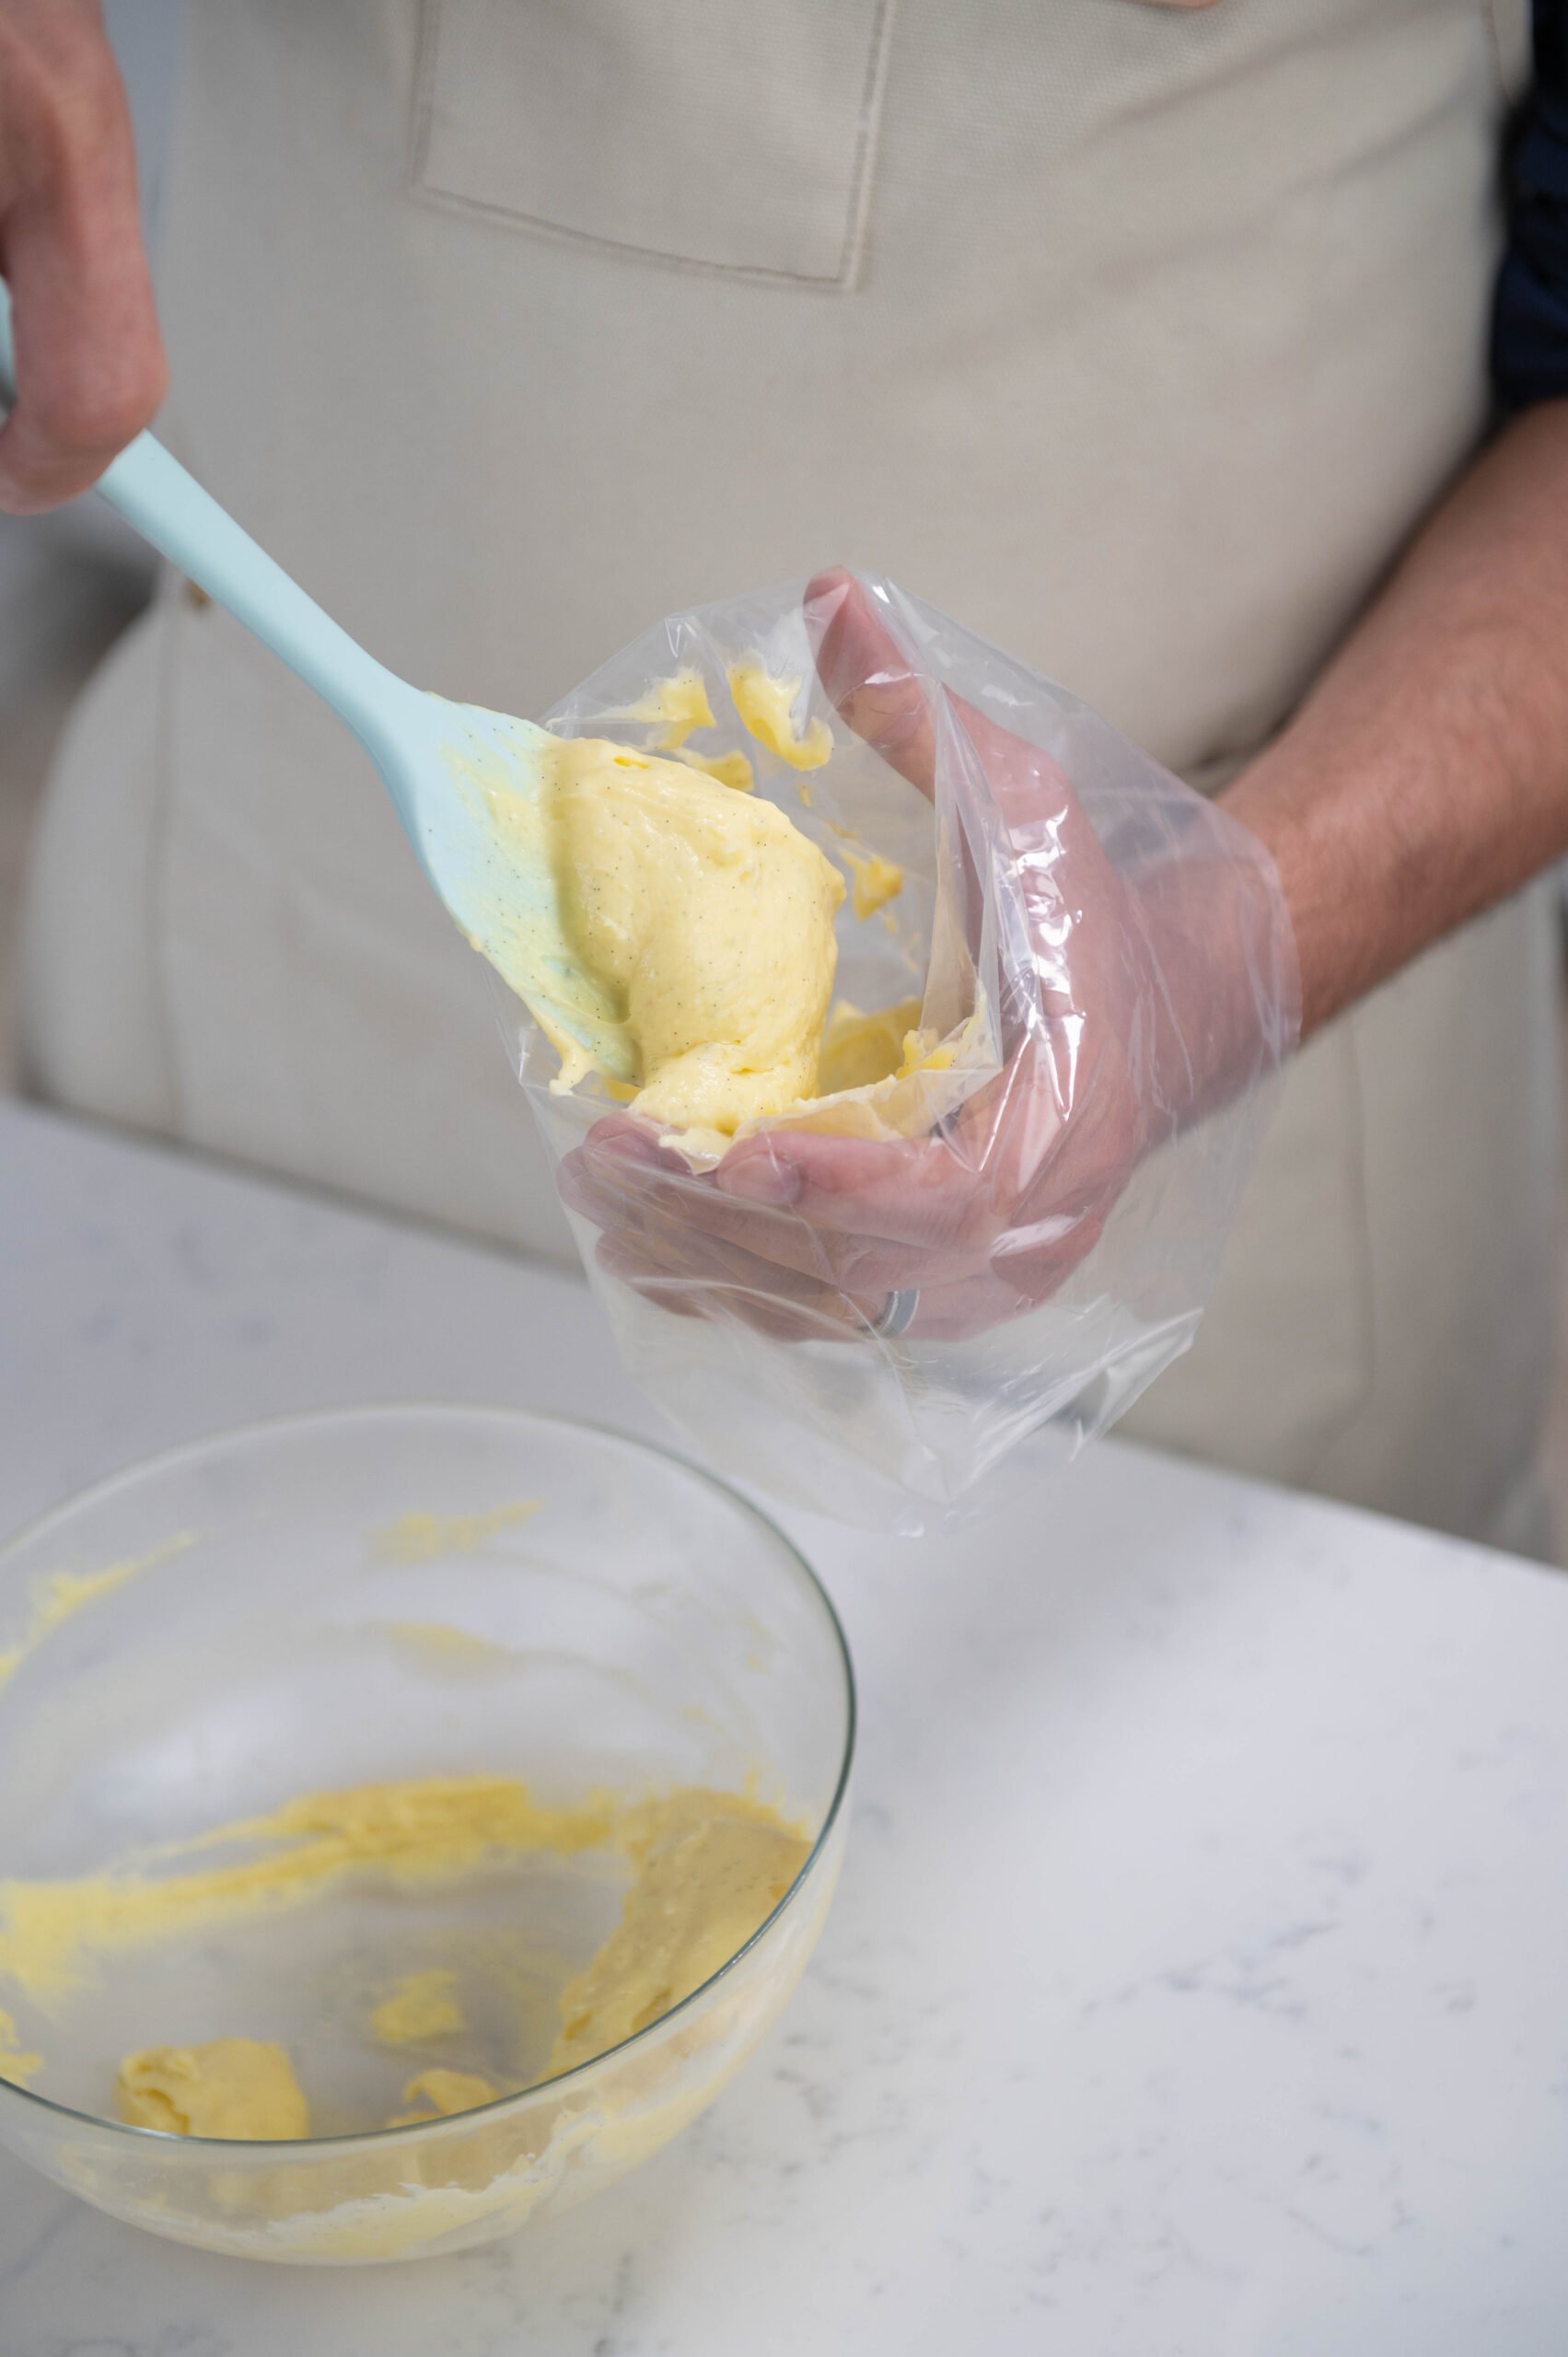 Hand using spatula to fill piping bag with pastry cream.